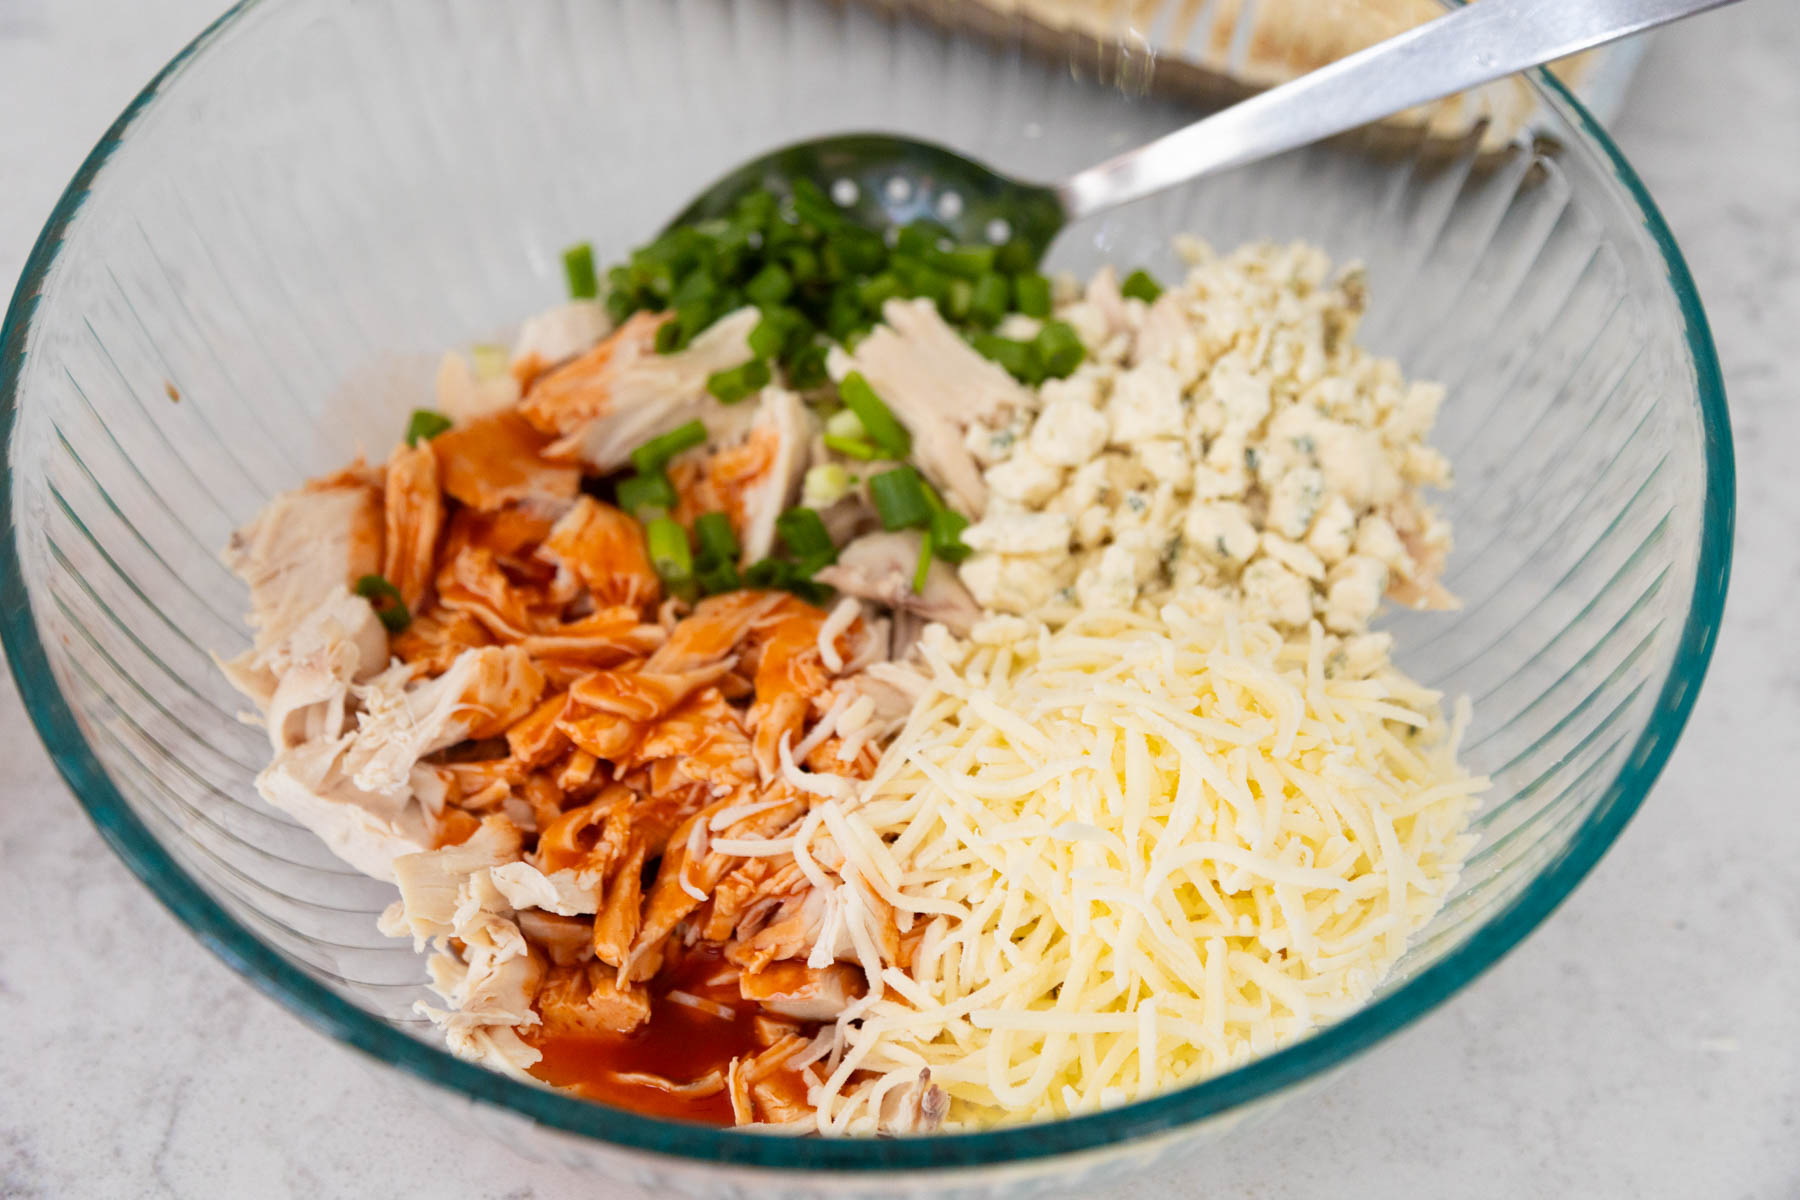 The shredded chicken, buffalo sauce, shredded cheese, and green onions are about to be mixed together in a mixing bowl.